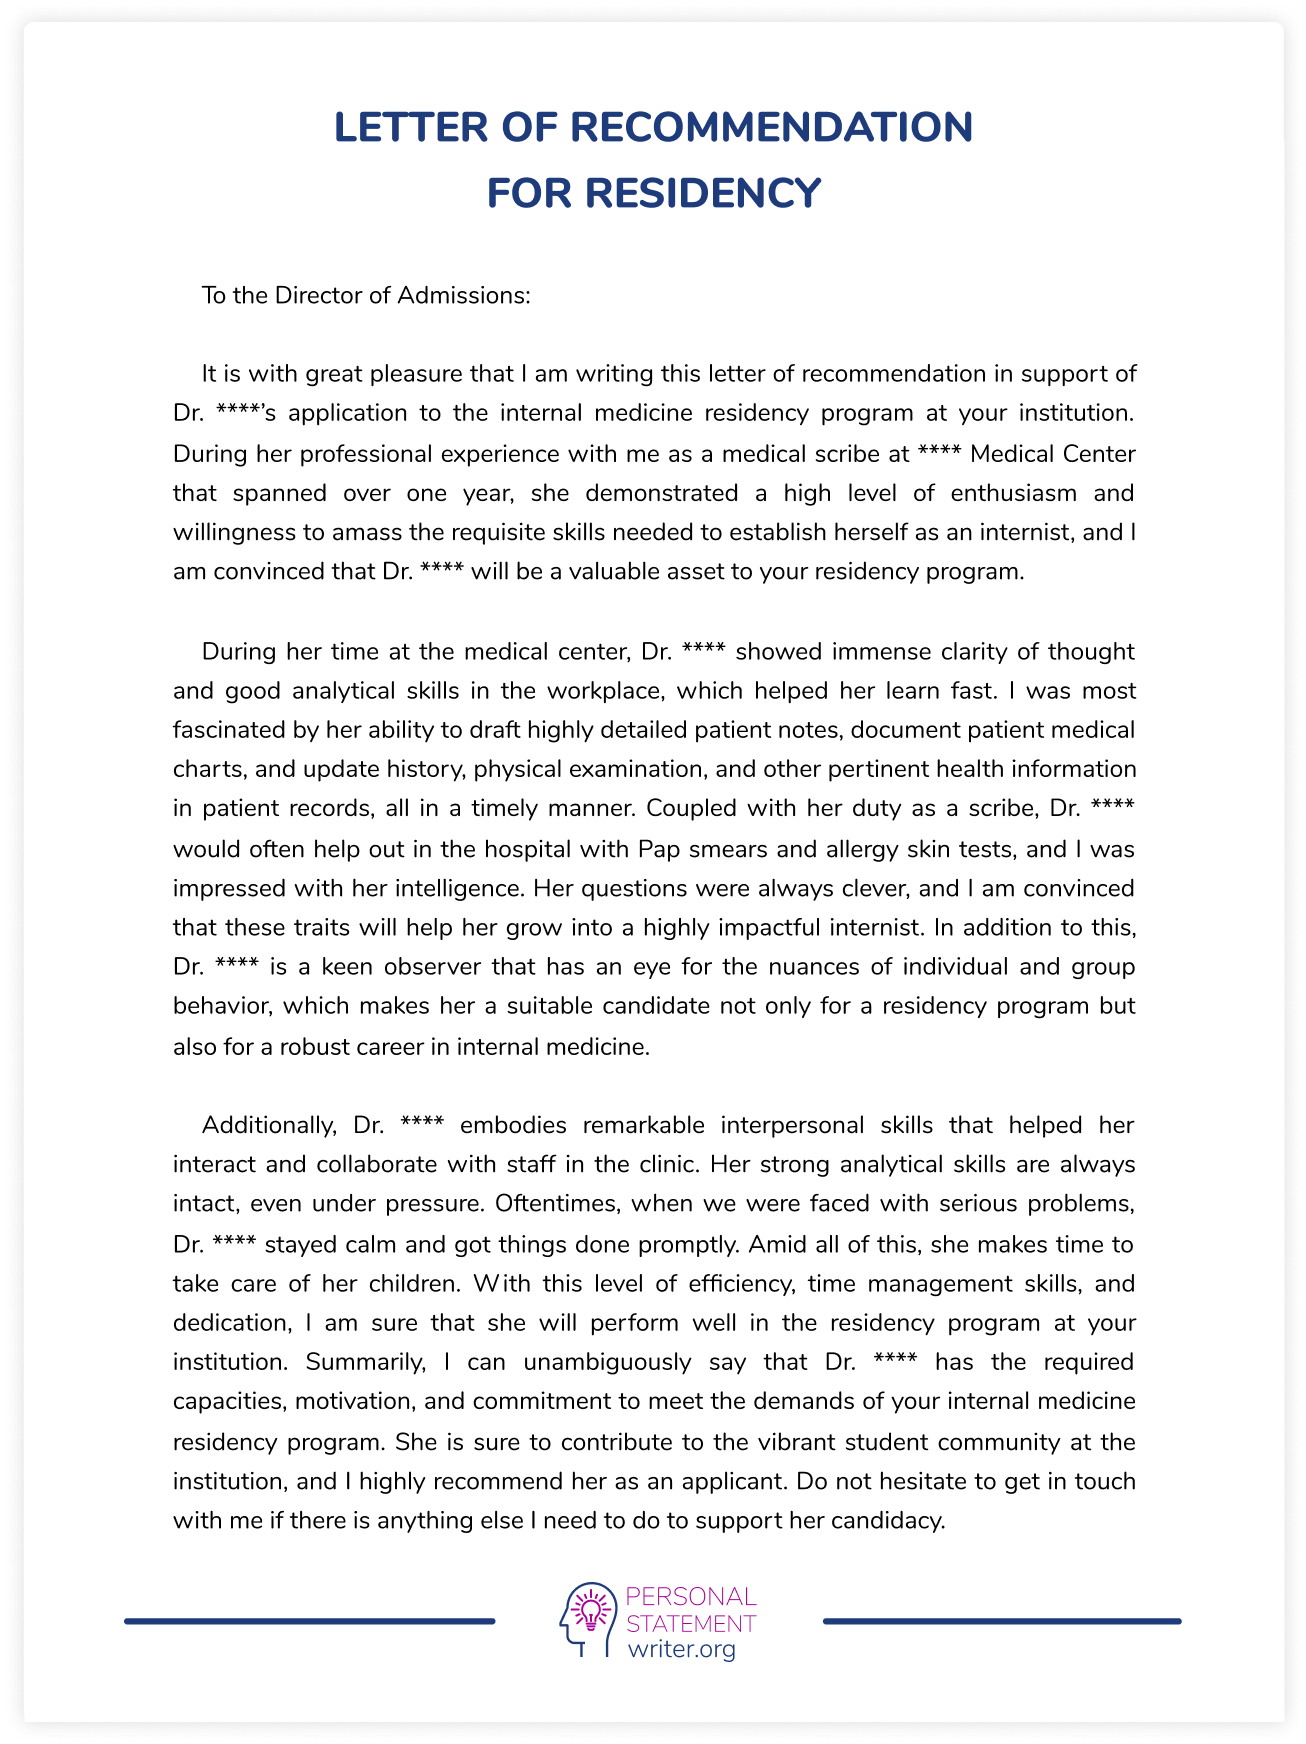 personal statement letter pdf